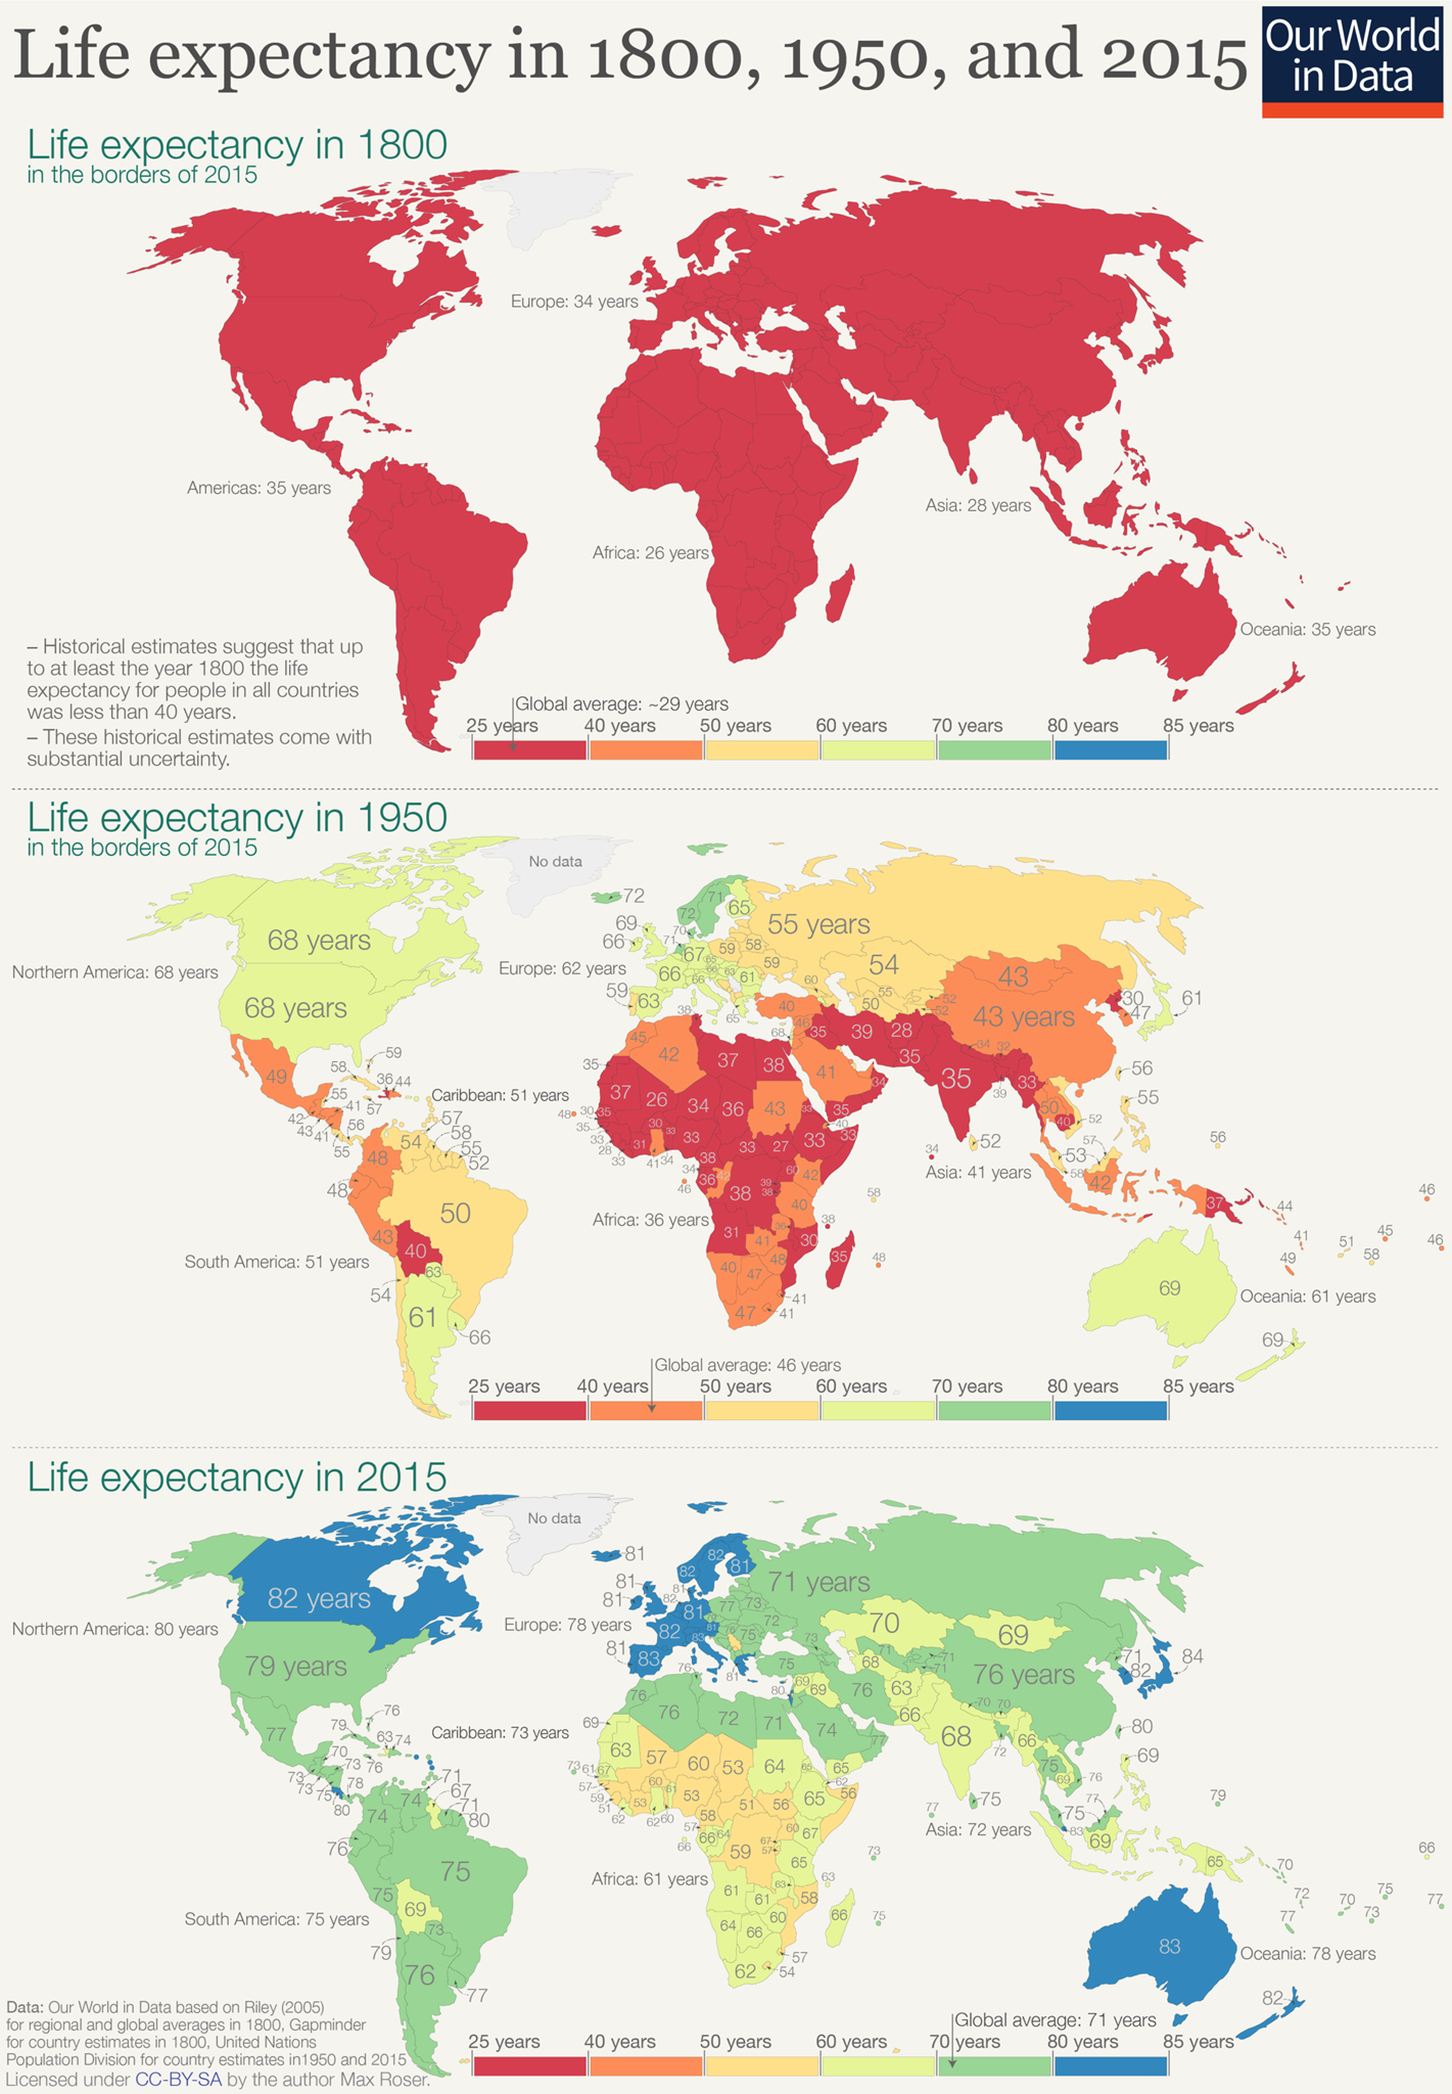 Maps showing life expectancy